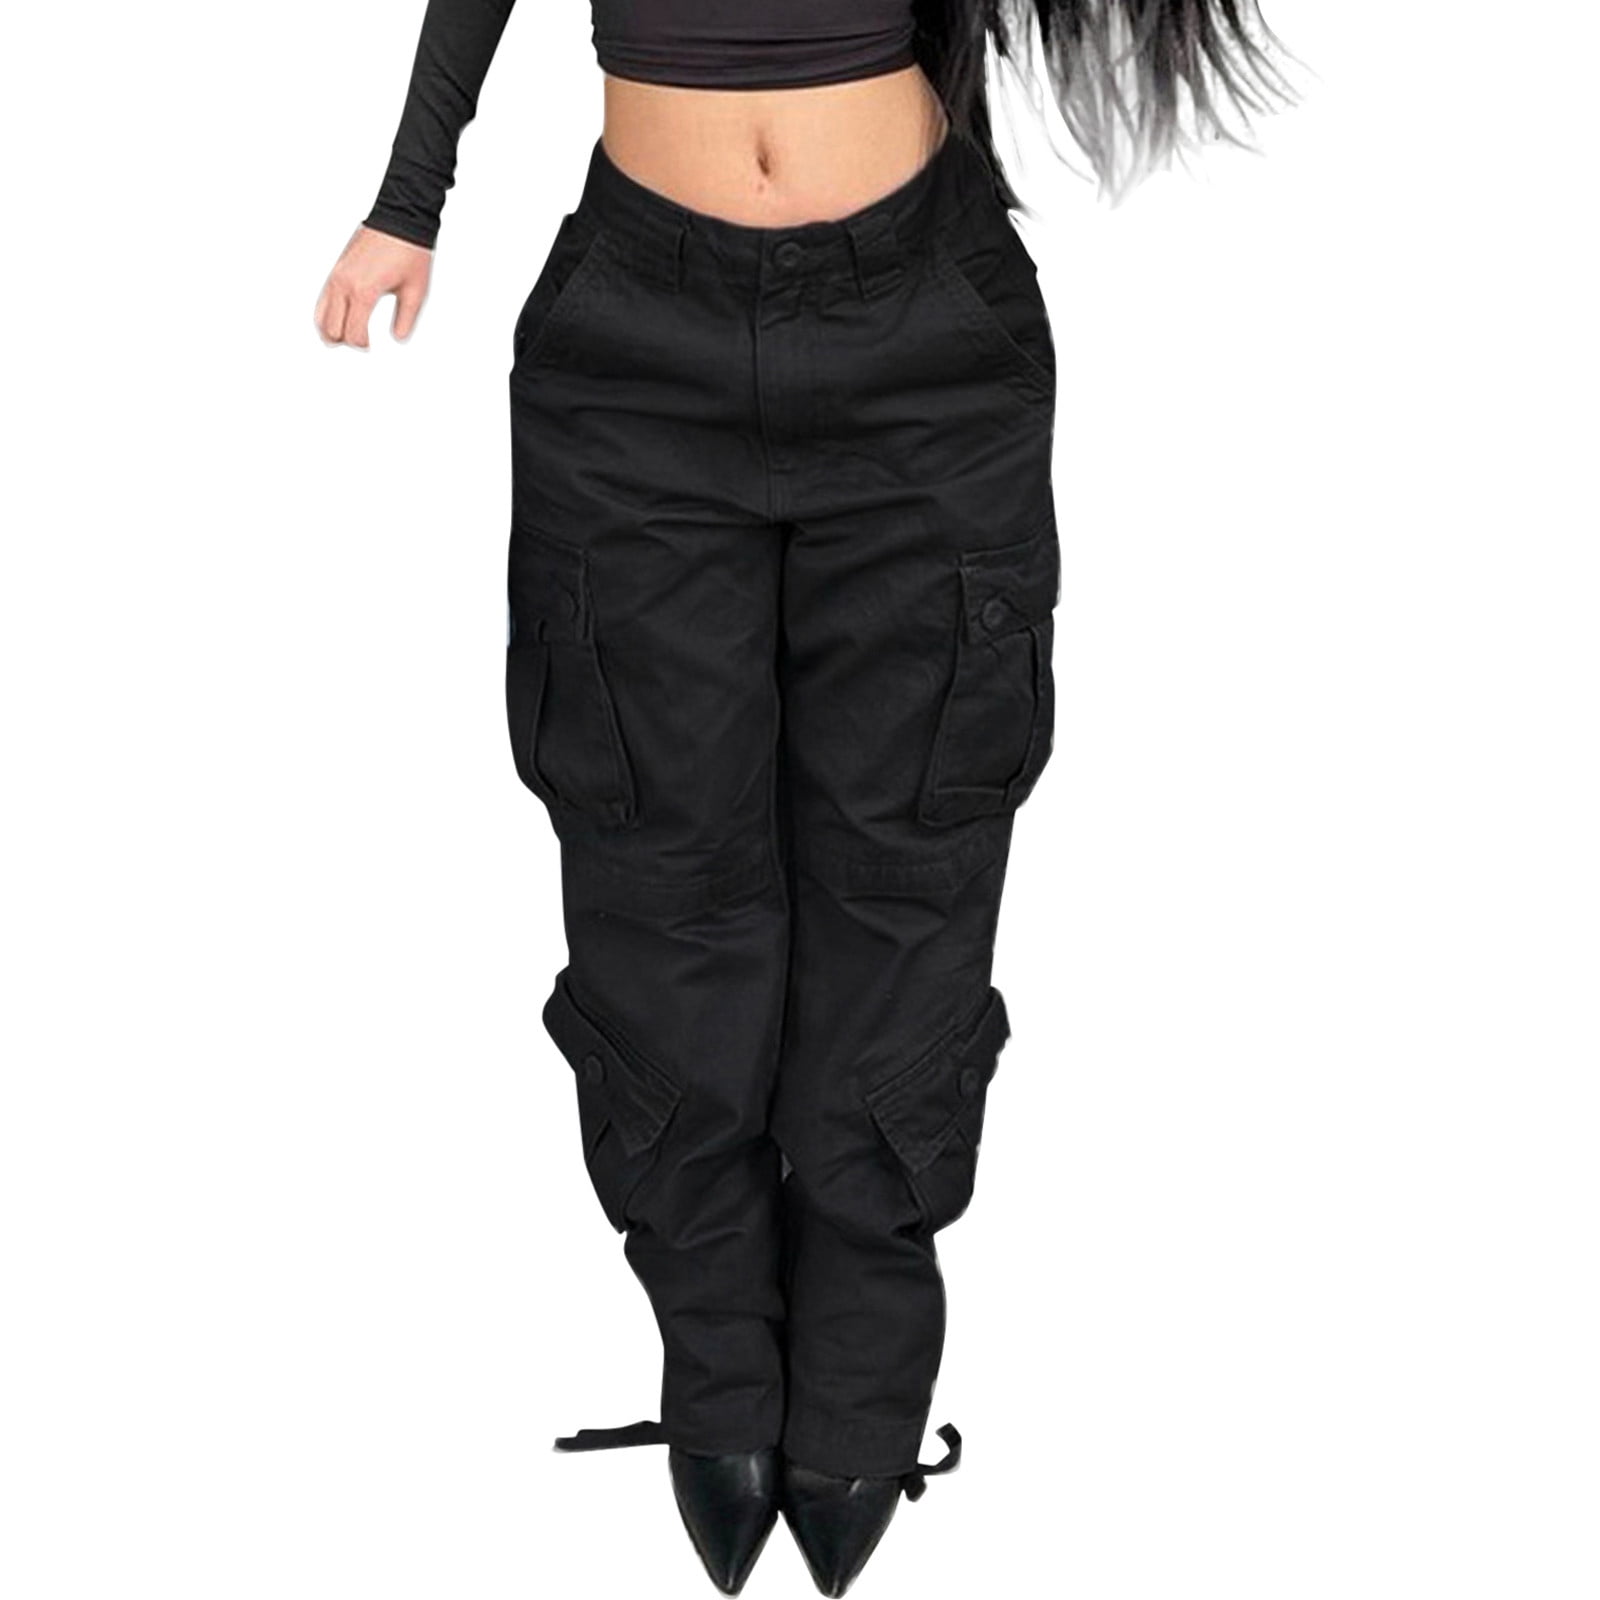 Women's Wide Leg Pants High Elastic Waisted in The Back Business Work  Trousers Long Straight Suit Pants Black at Amazon Women's Clothing store